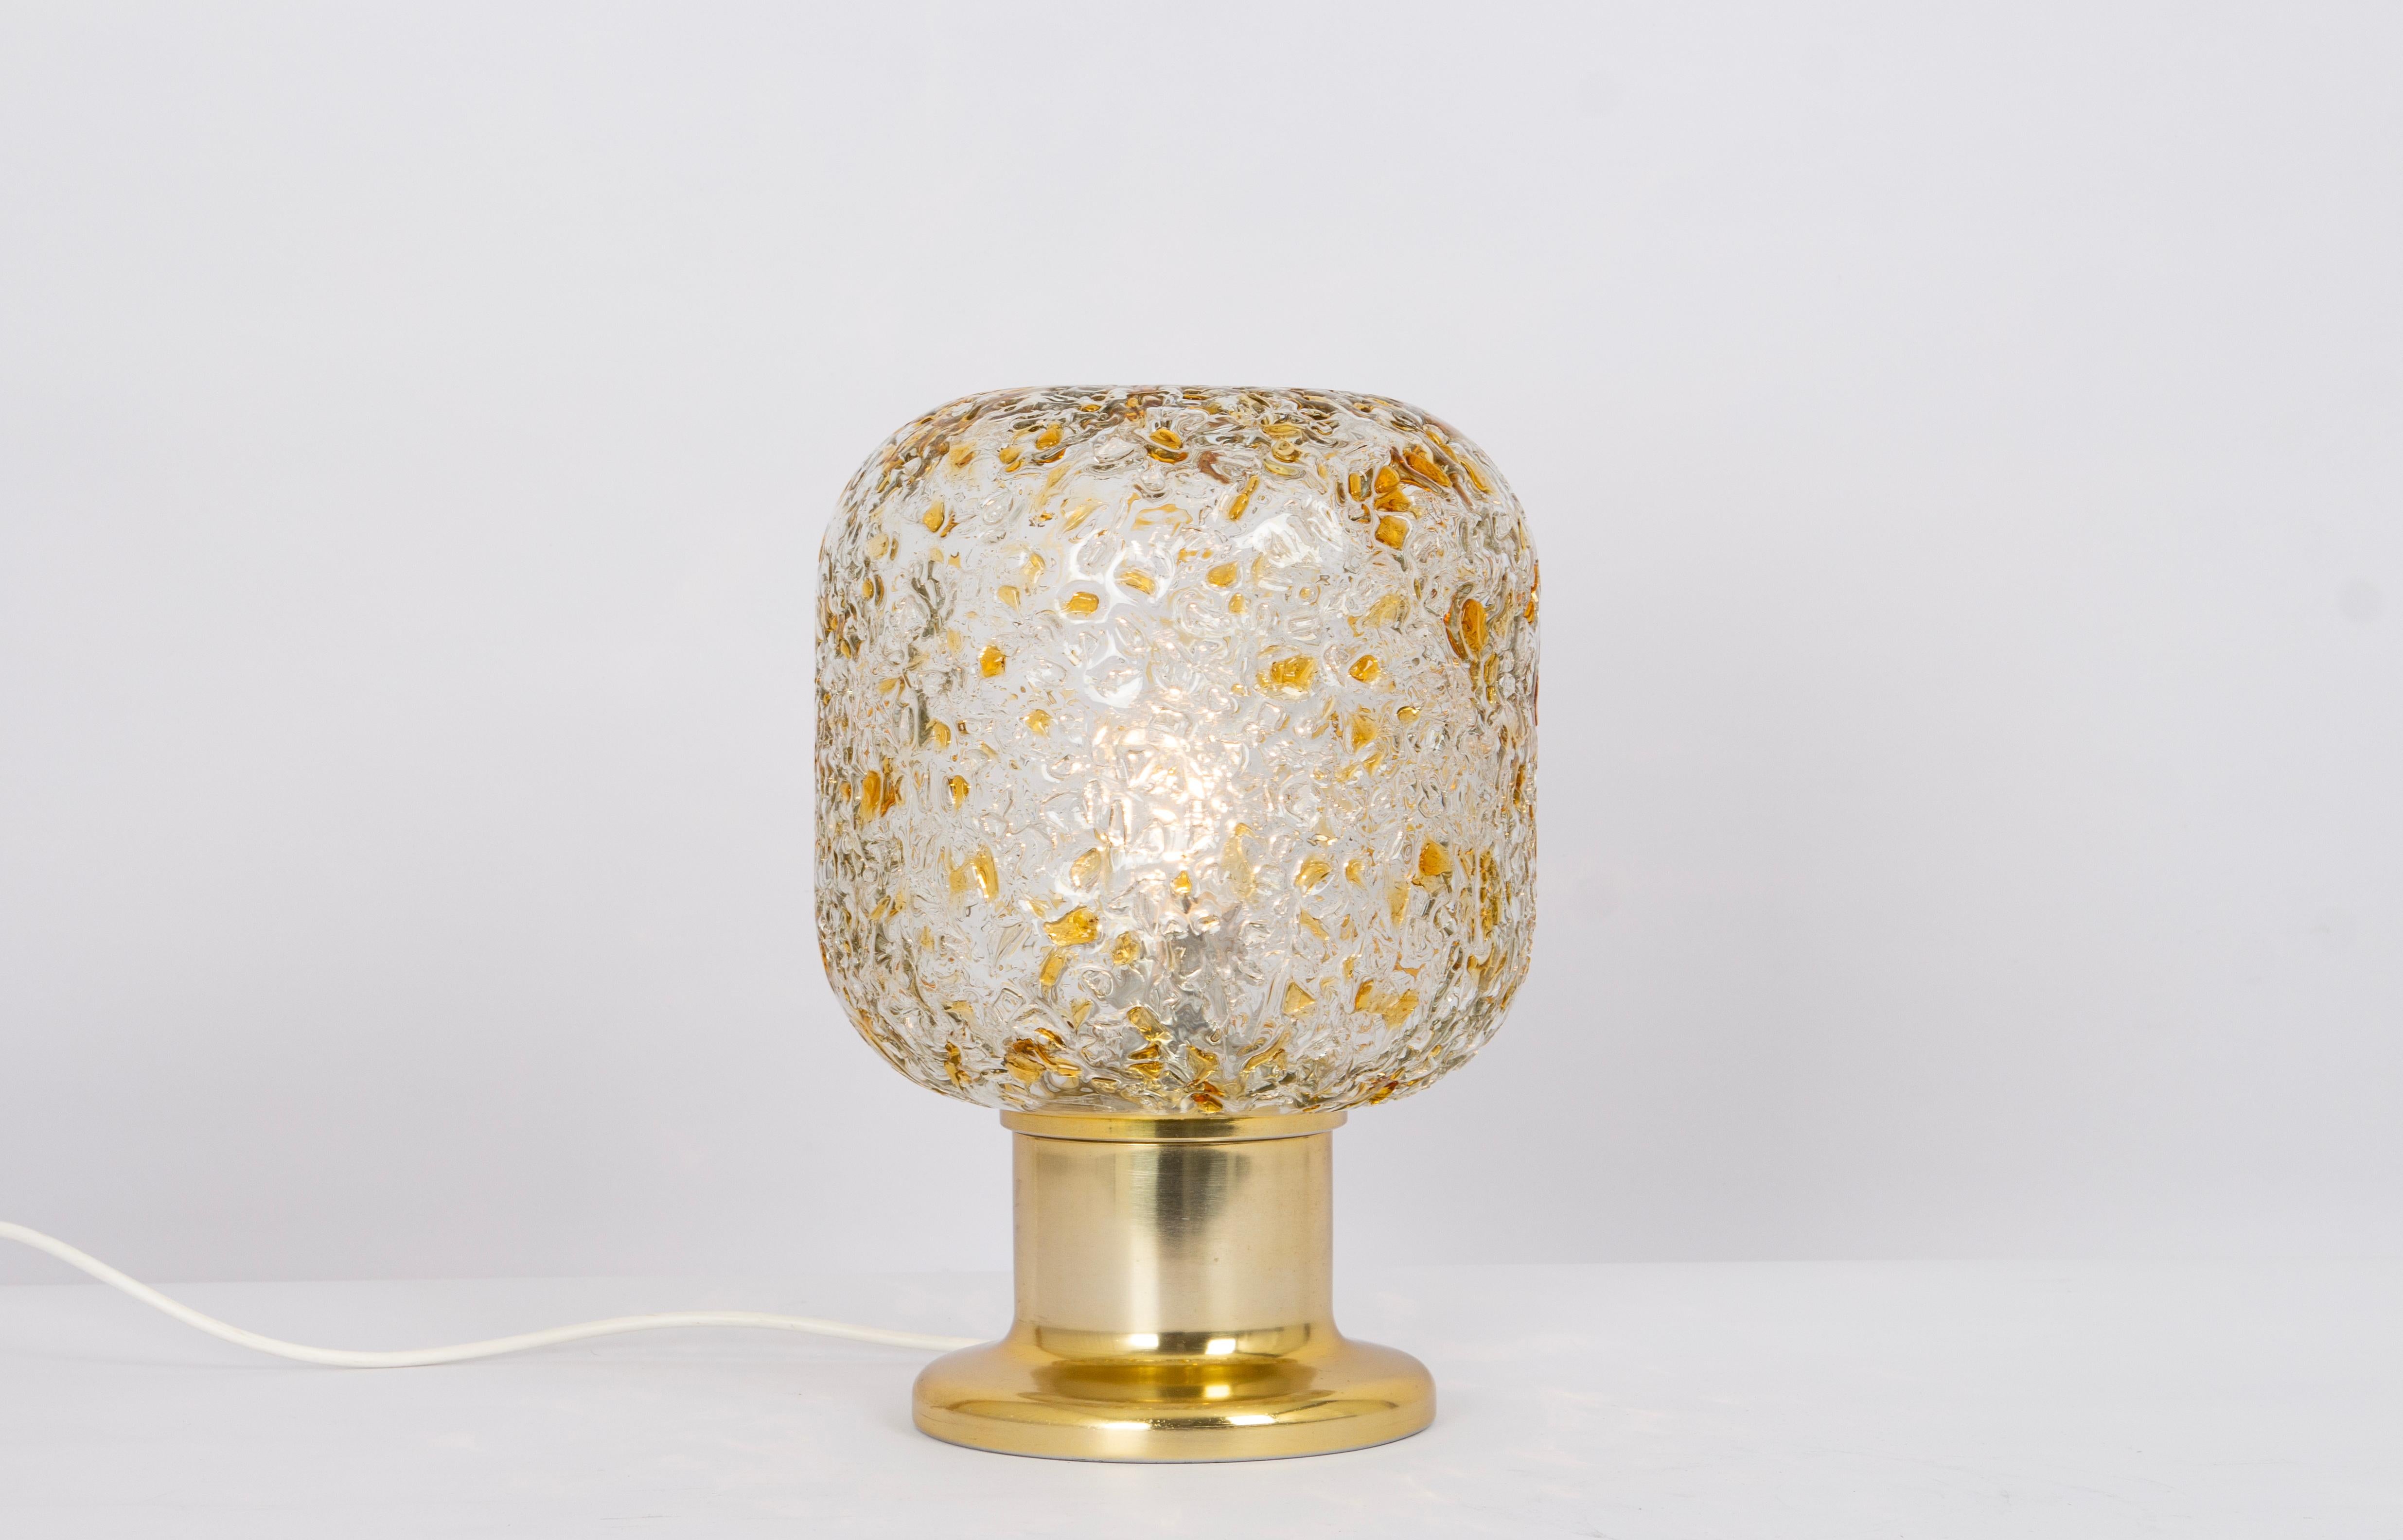 A pair of spectacular vintage table lamps made by Doria in the 1970’s.

This is beautifully made with a large glass shade and gold color frame. It is a fantastic size; it’s very impressive and in great original condition. 

This is in good working